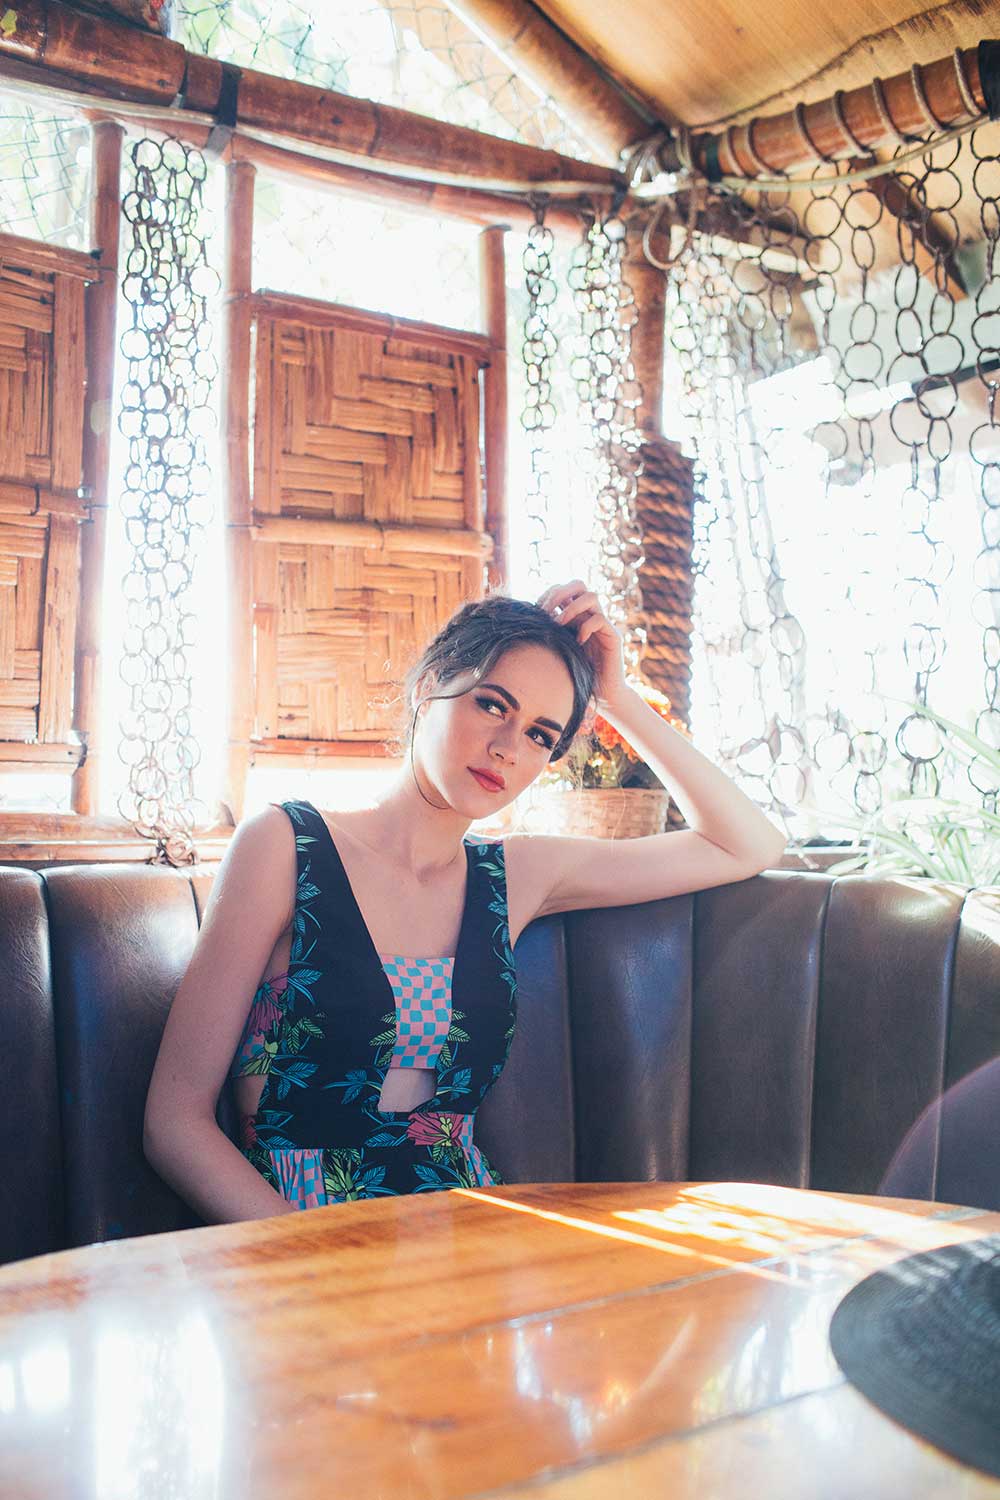 woman flowered dress sitting in restaurant booth